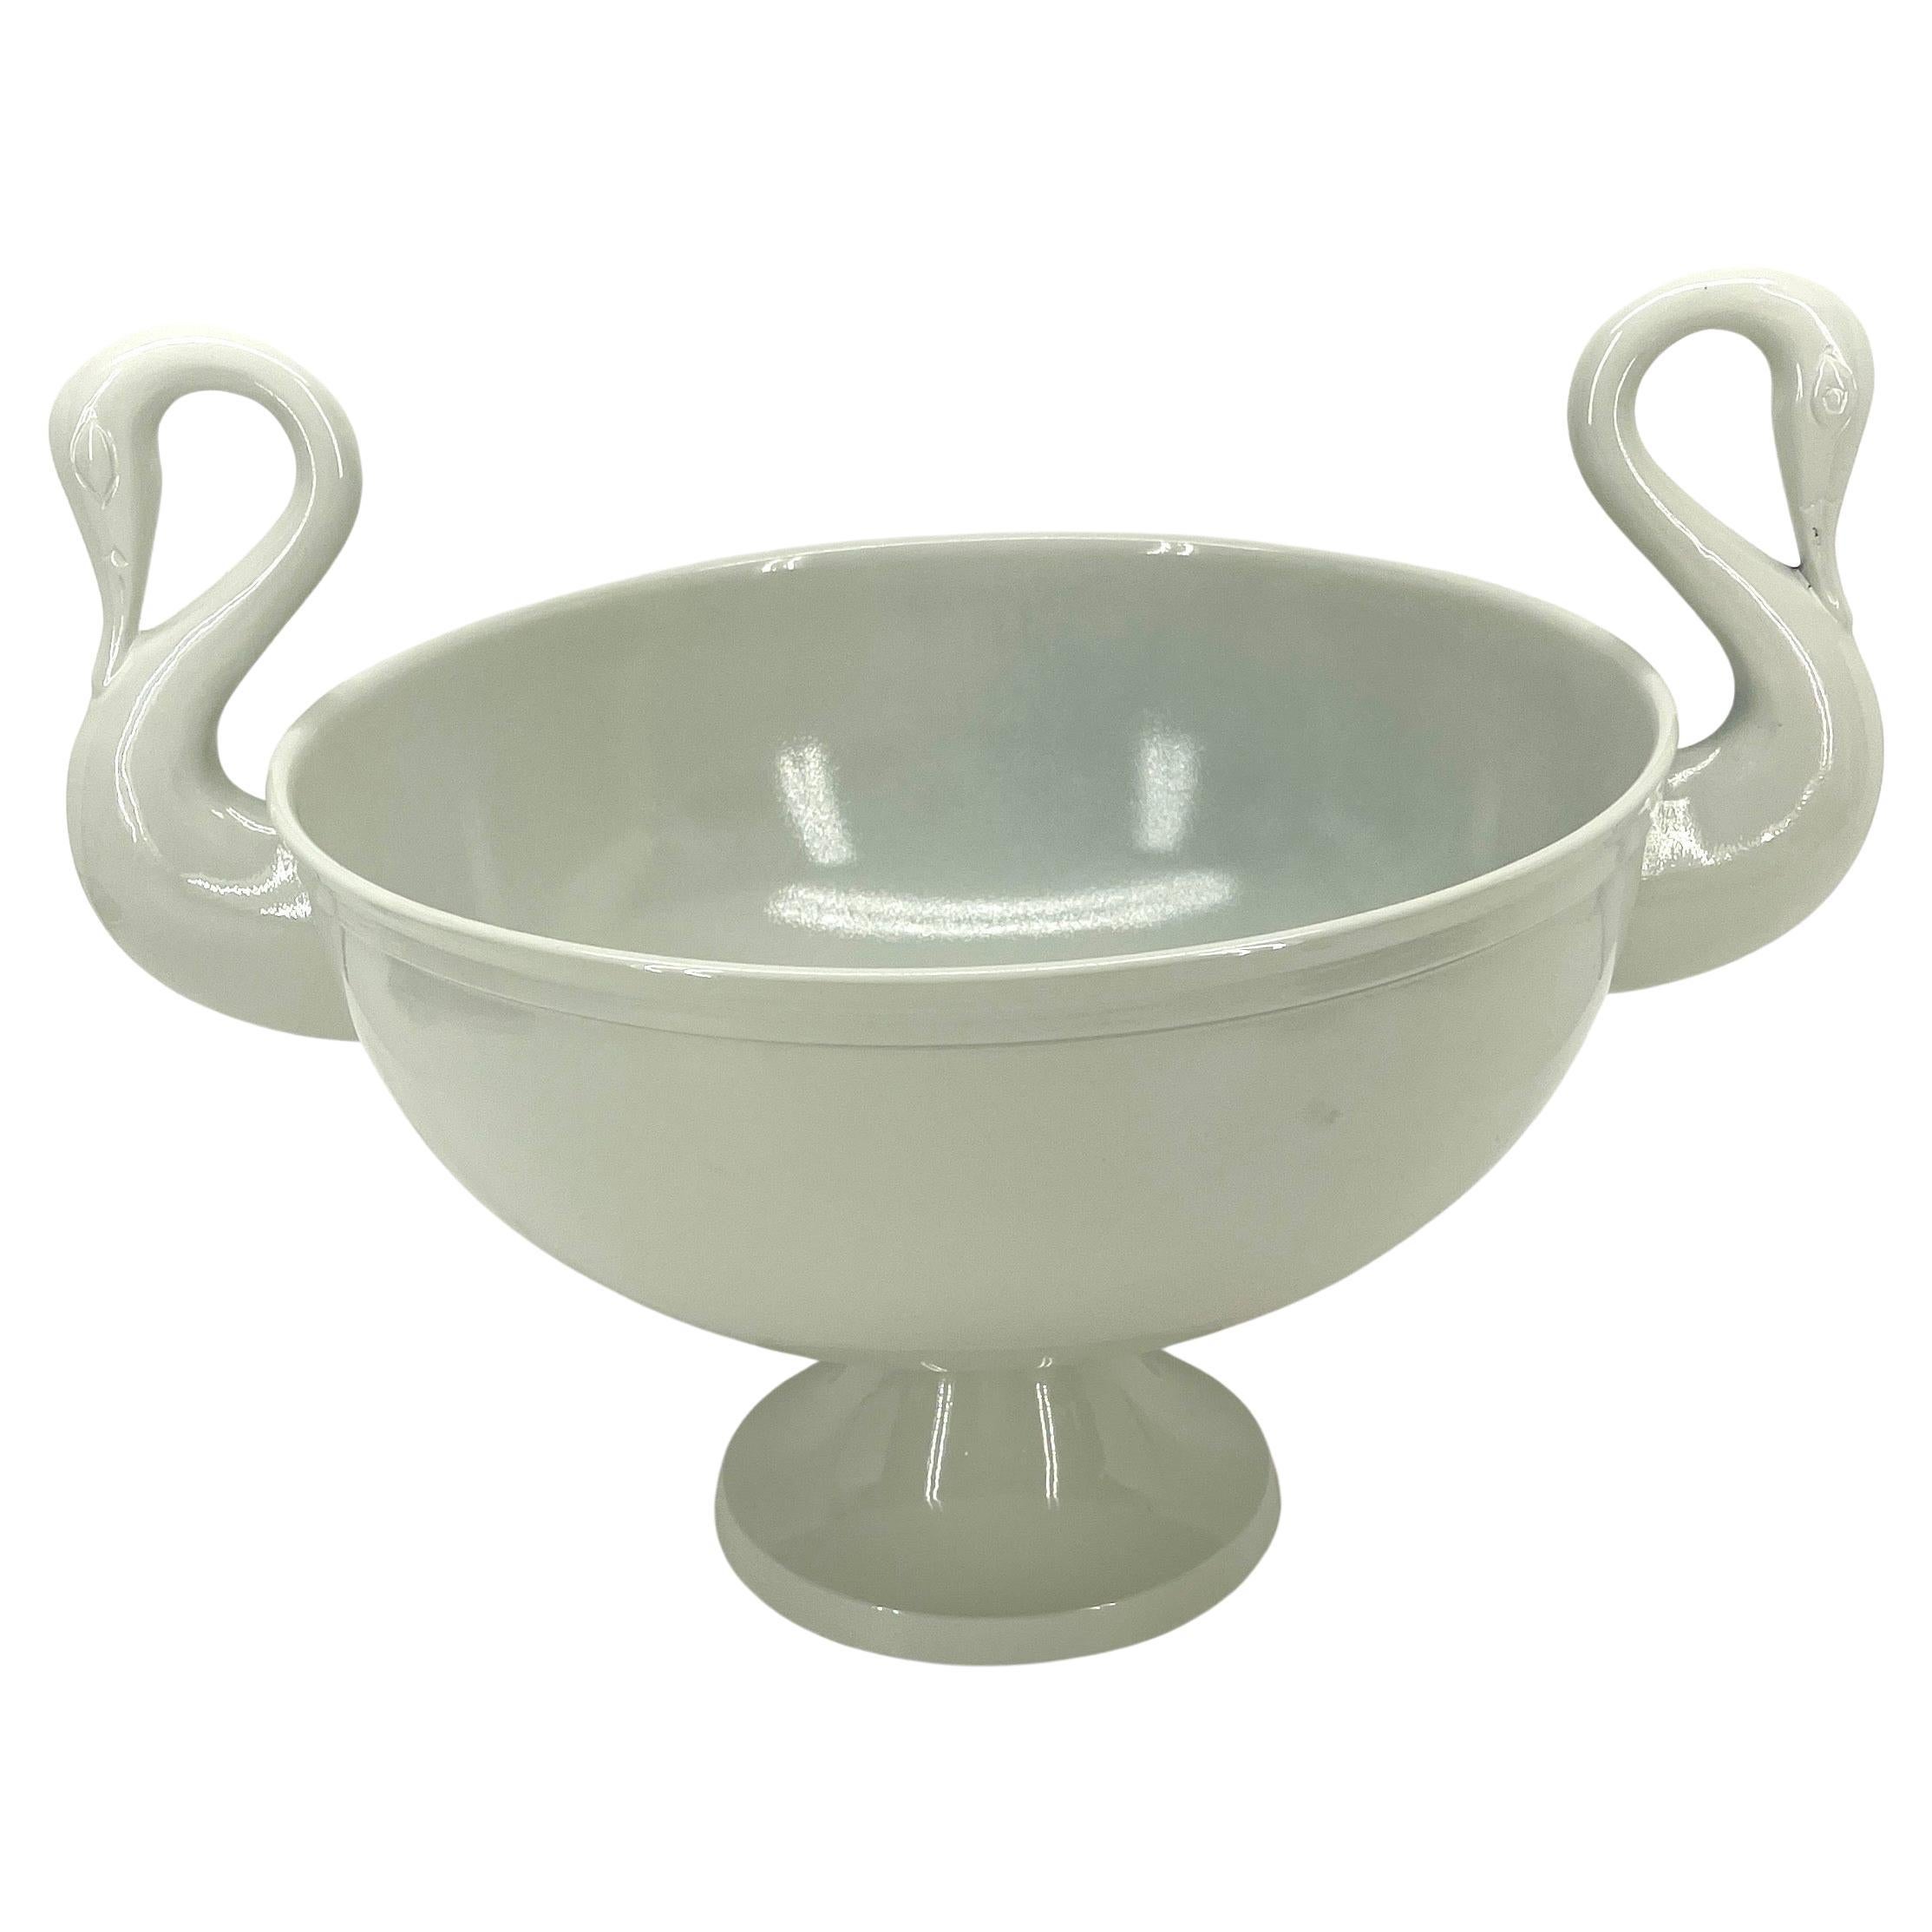 Off White Mid-Century Towle Swan-Neck Centerpiece Bowl, England circa 1950's

This off white, neutral colored powder-coated centerpiece bowl is now one of a kind, since we recently powder-coated in a Snowbird White paint that makes it both